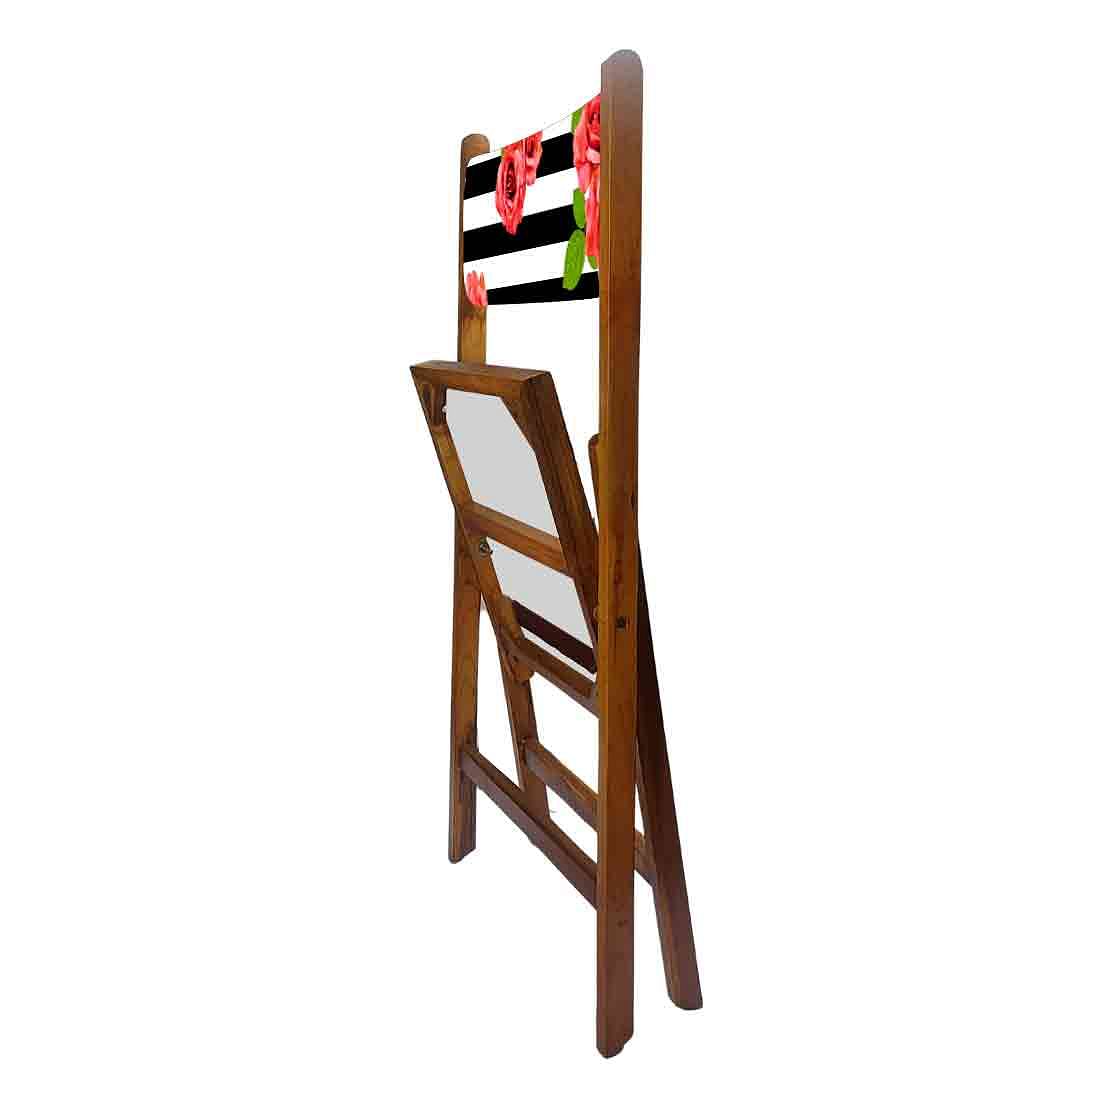 Nutcase Folding Wooden Dining Chairs For Home - Black Strip Floral Nutcase